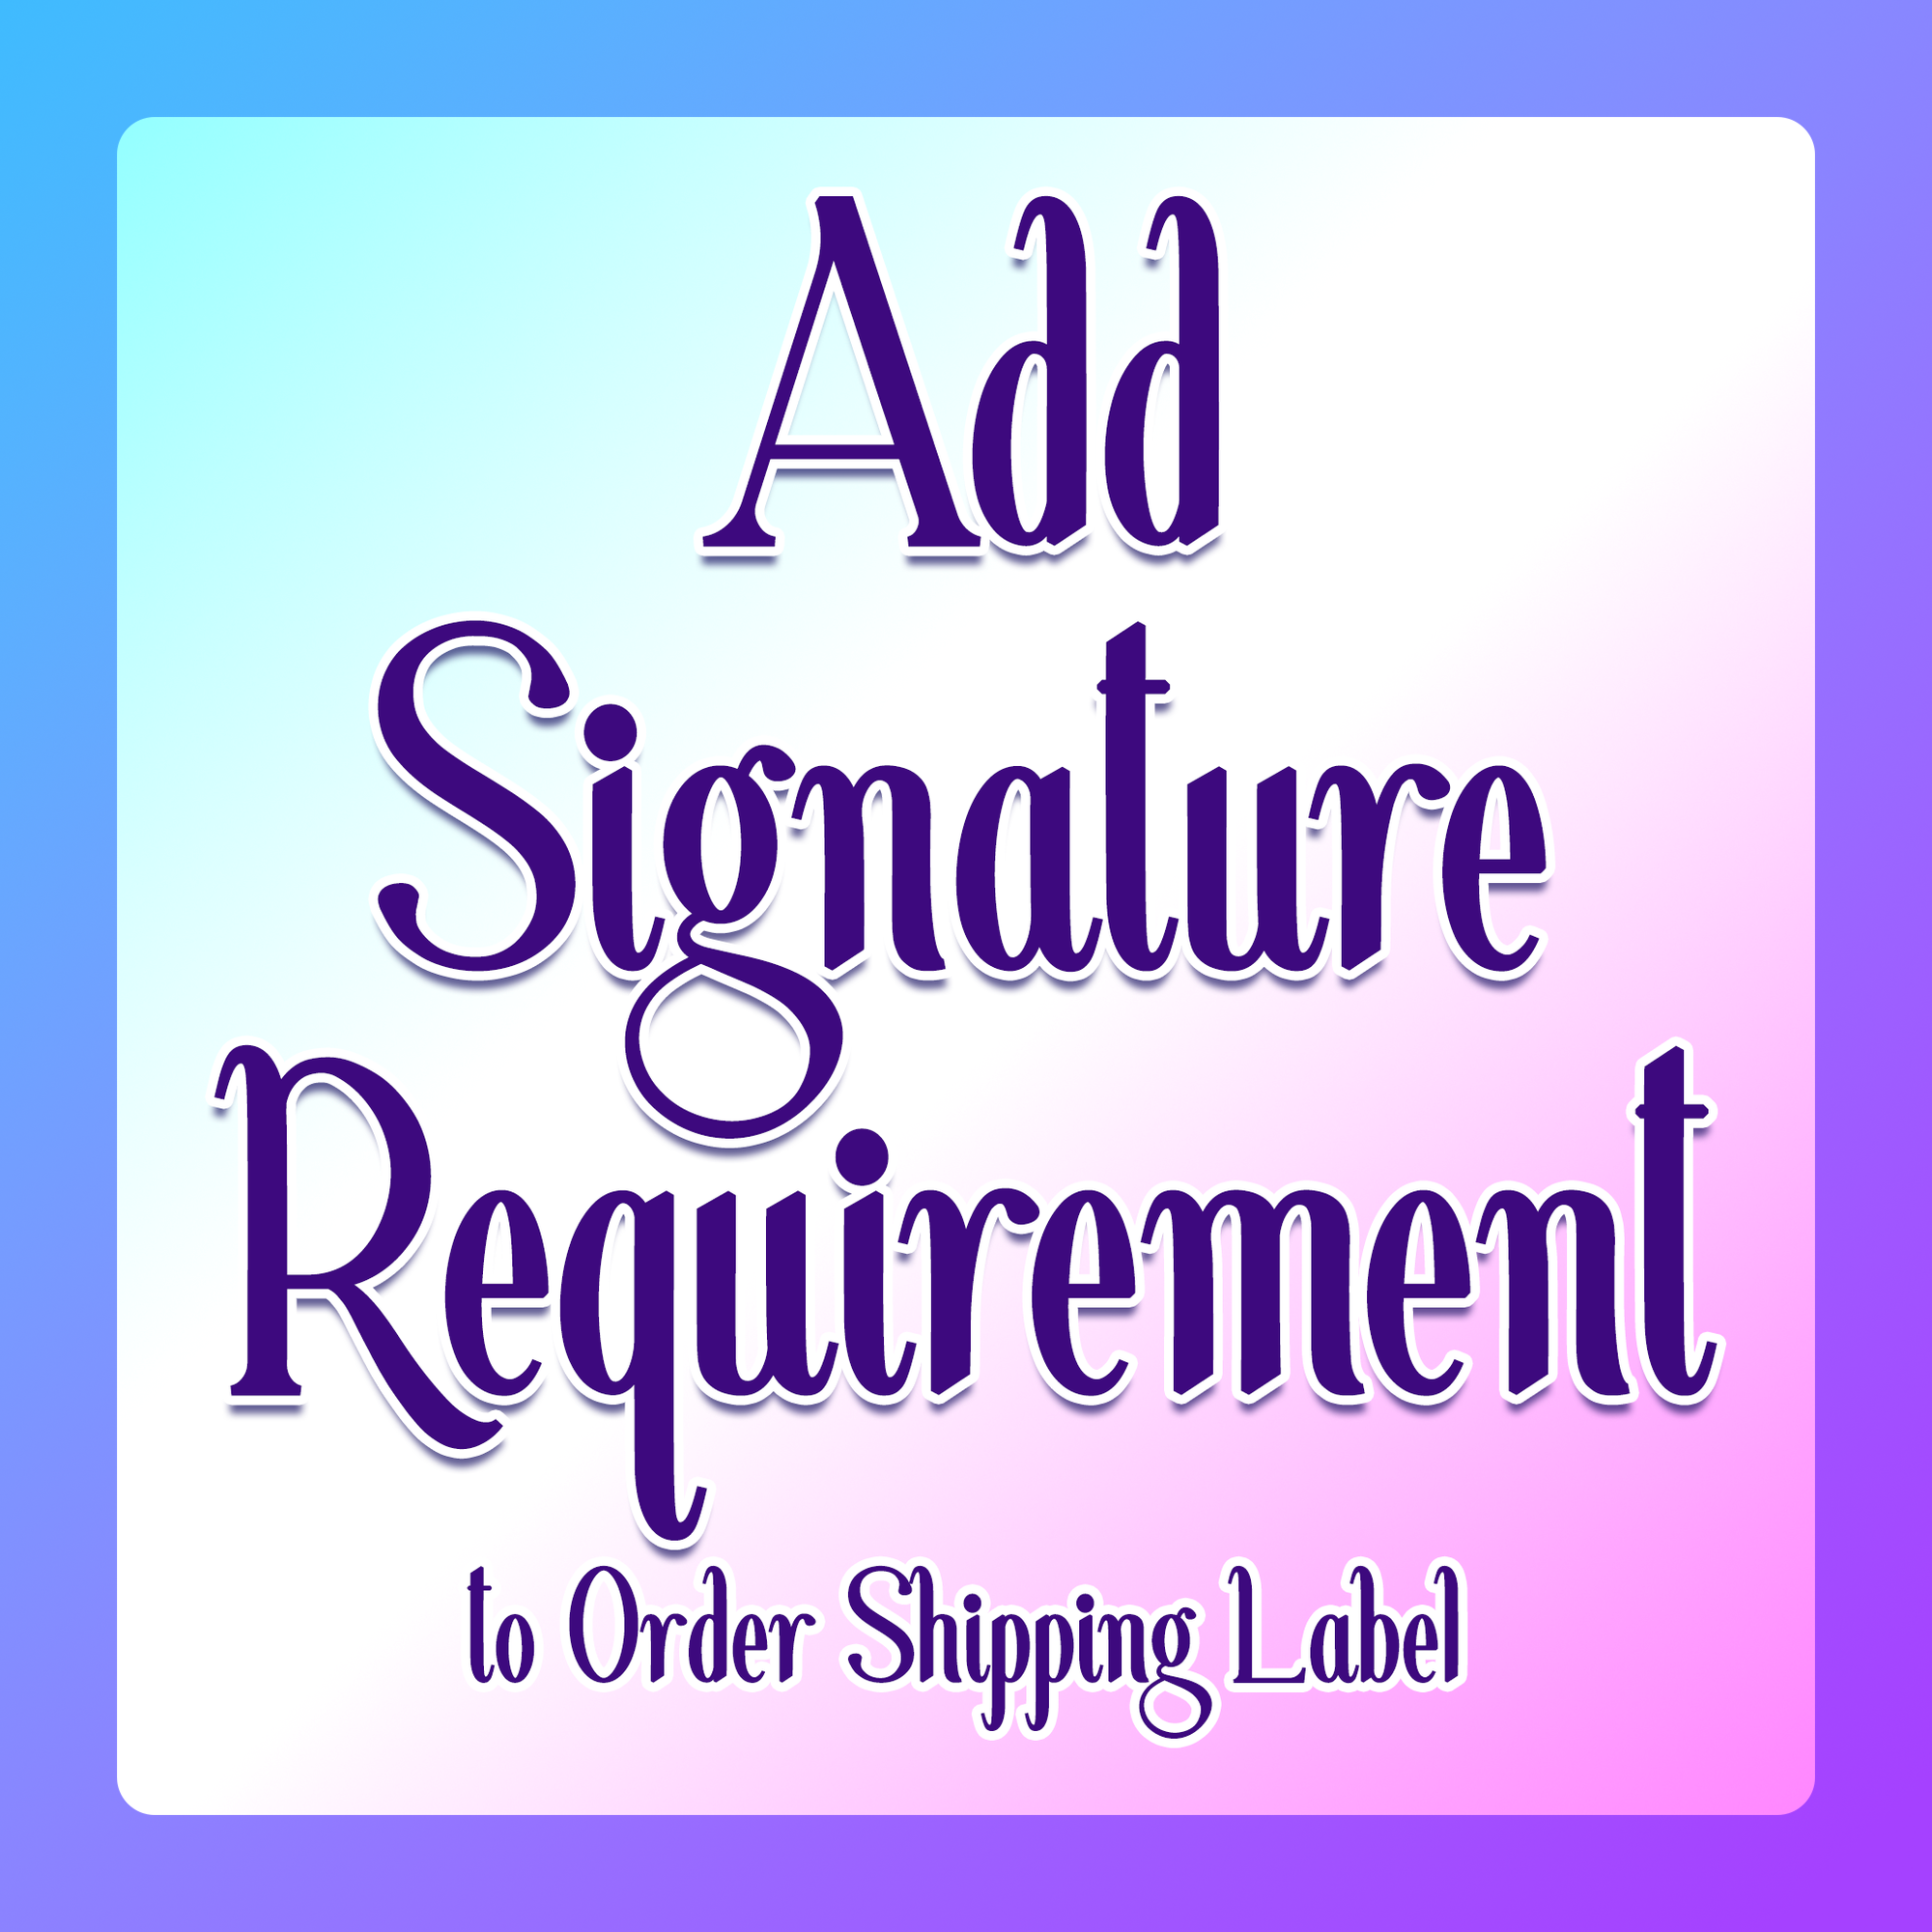 USPS Signature Requirement for Package Delivery